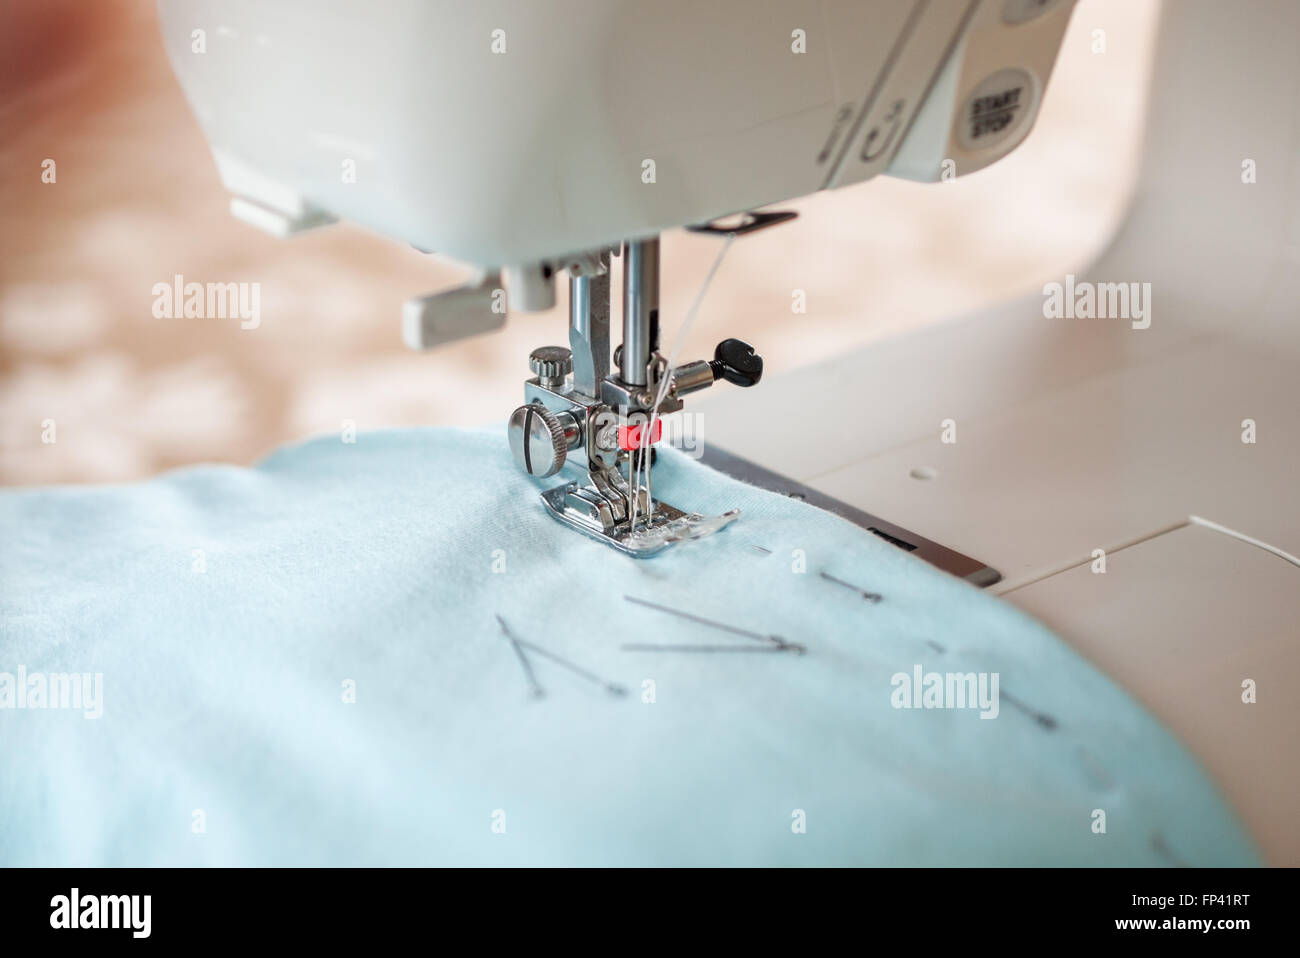 Sewing machine, blue fabric and pins Stock Photo